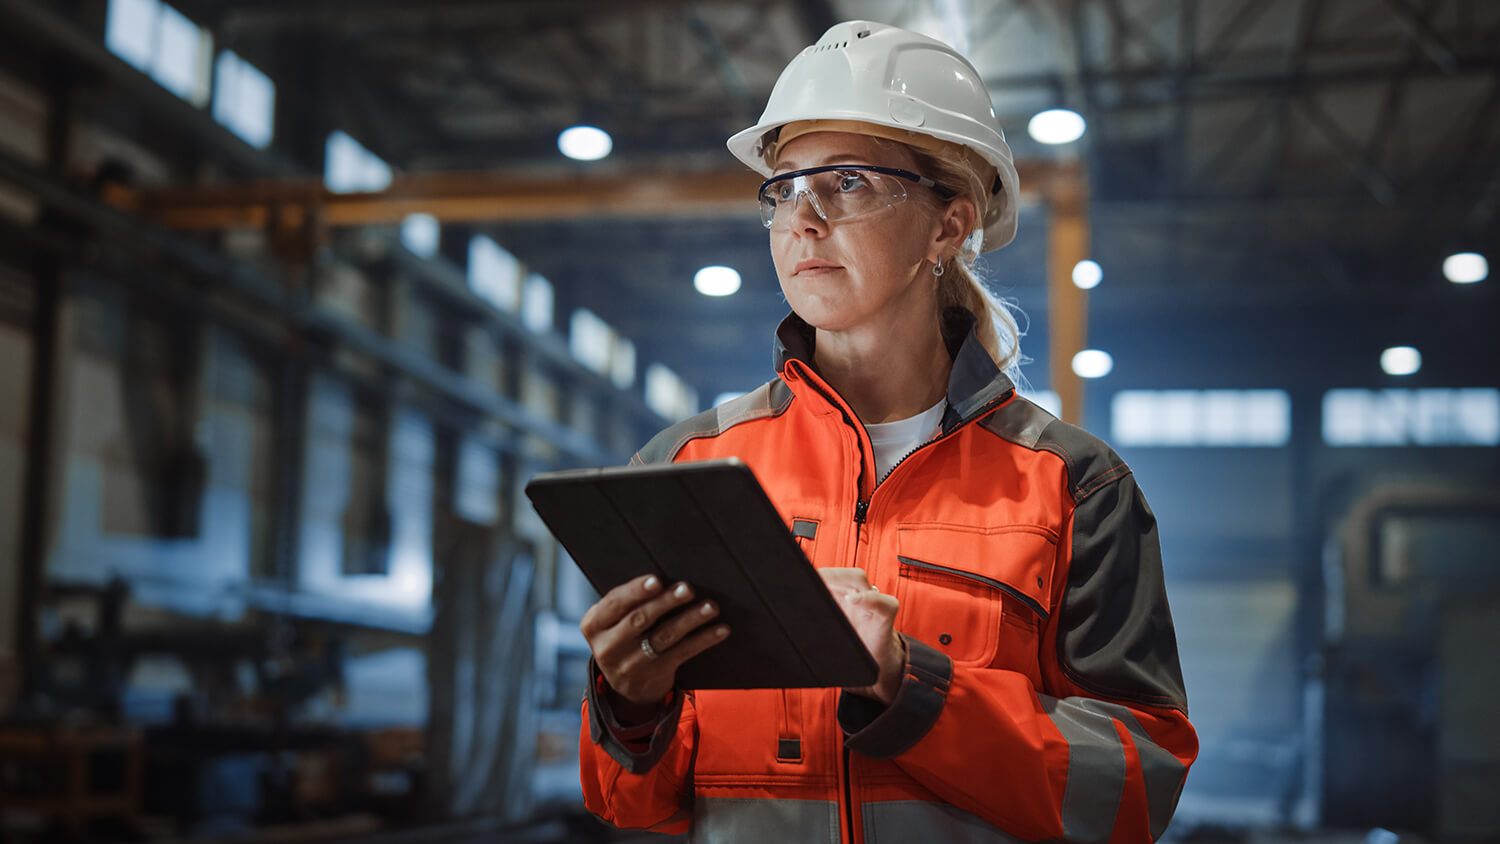 Connected worker use cases for manufacturing operations